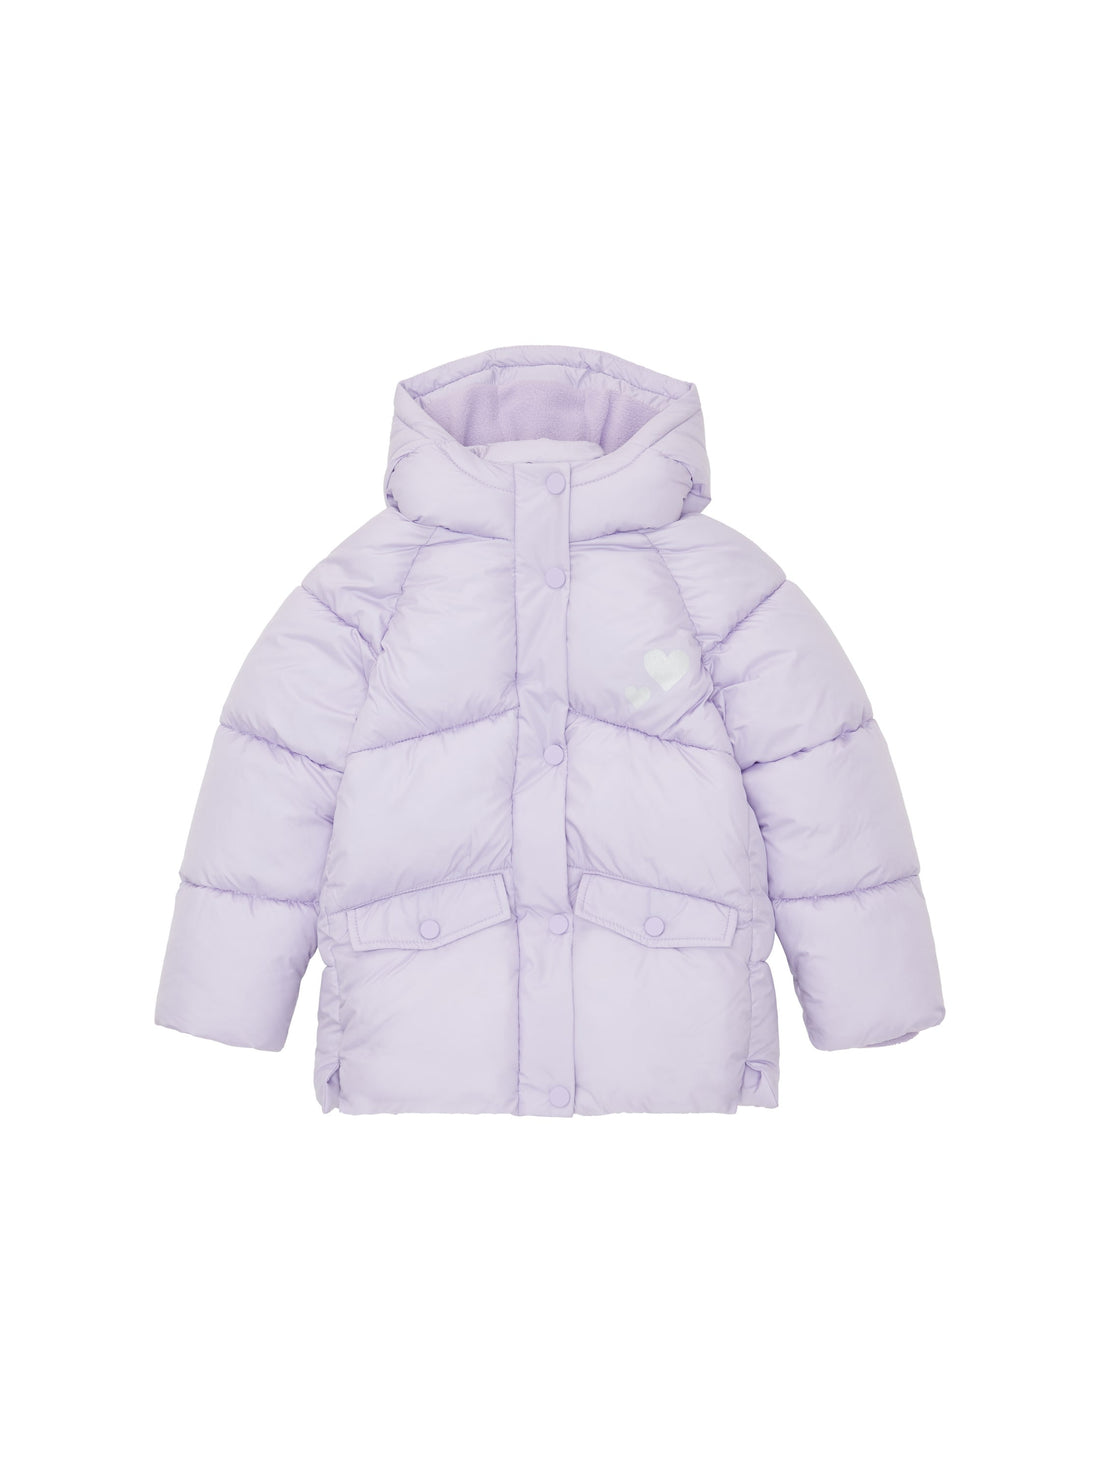 Puffer Jacket With Hood_1038501_29478_01